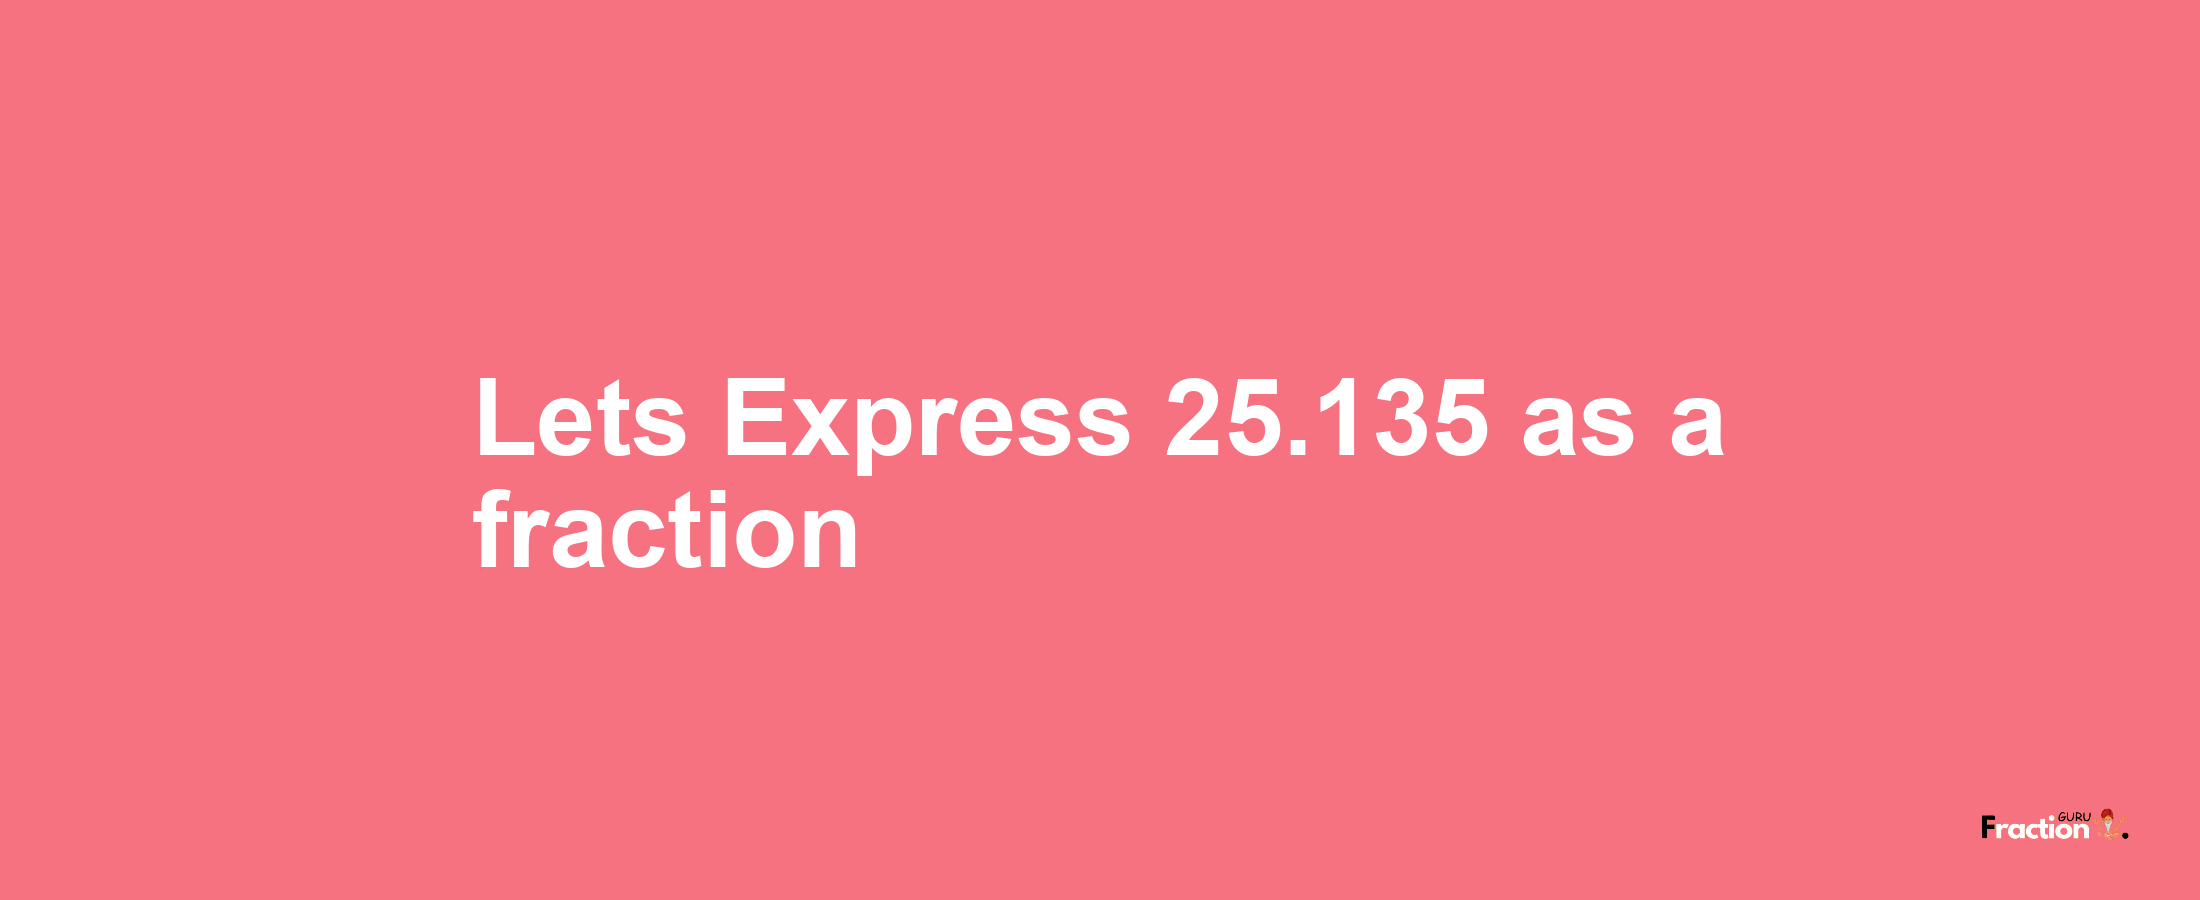 Lets Express 25.135 as afraction